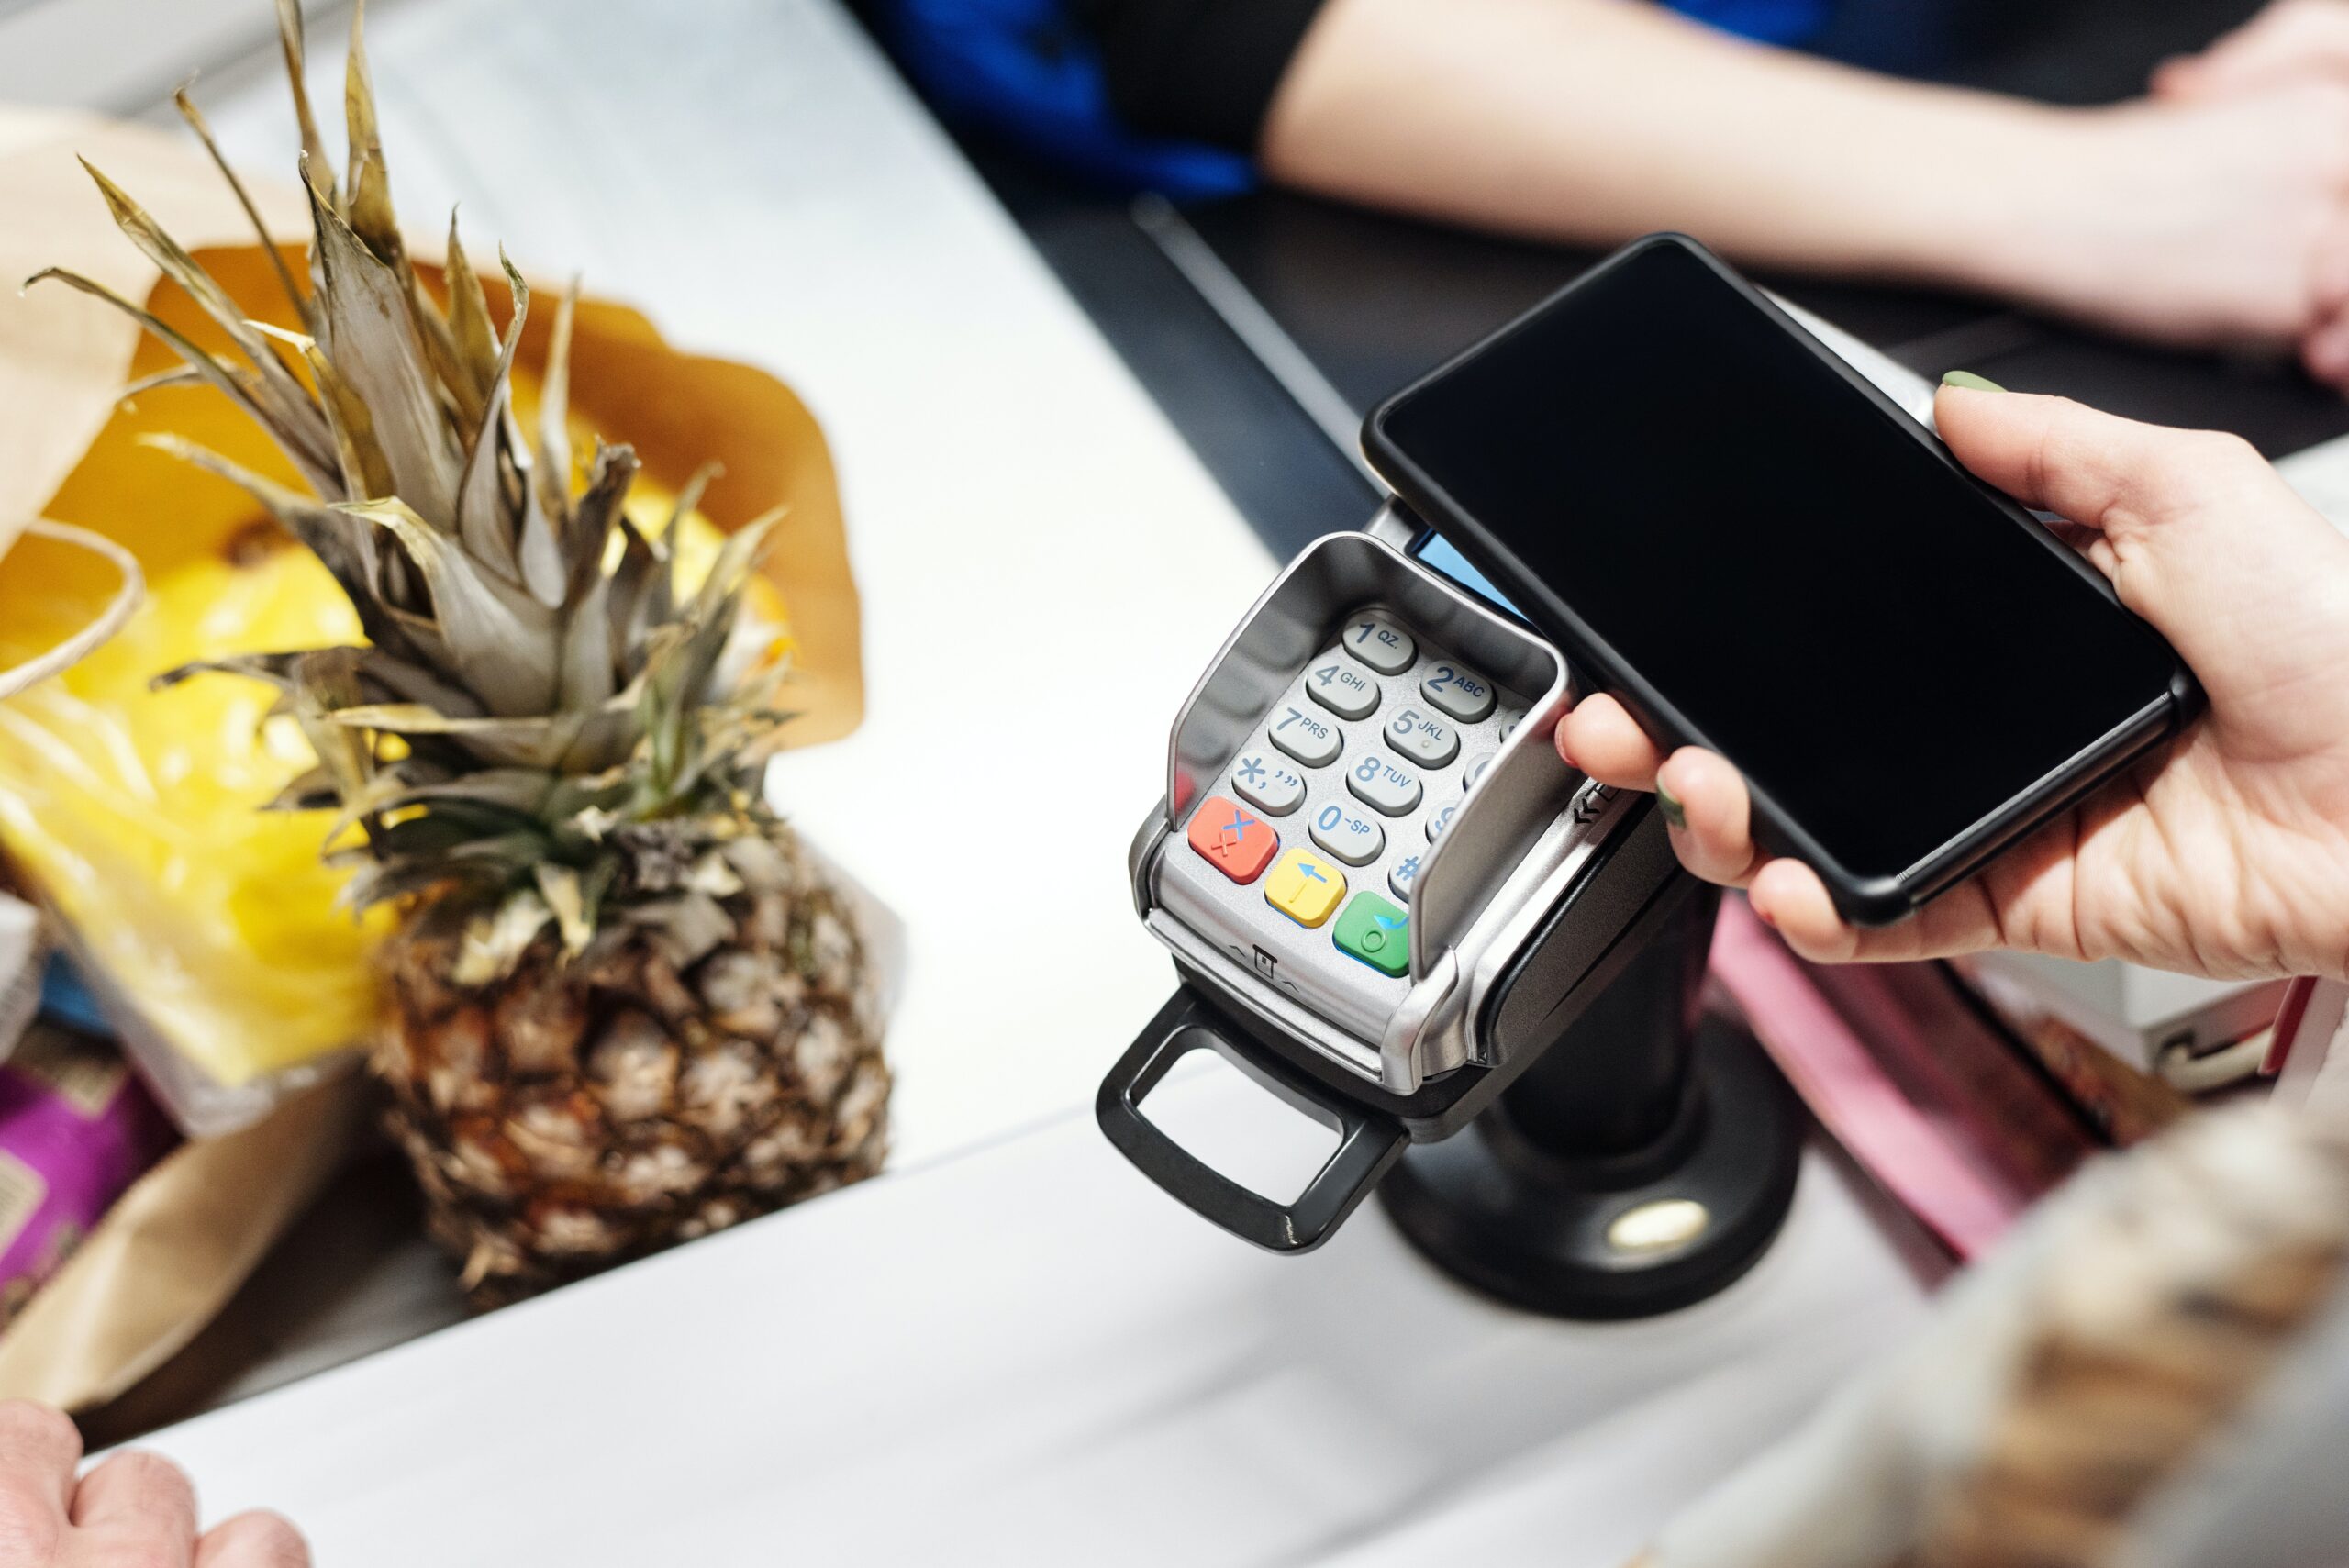 mobile payment at a grocery store